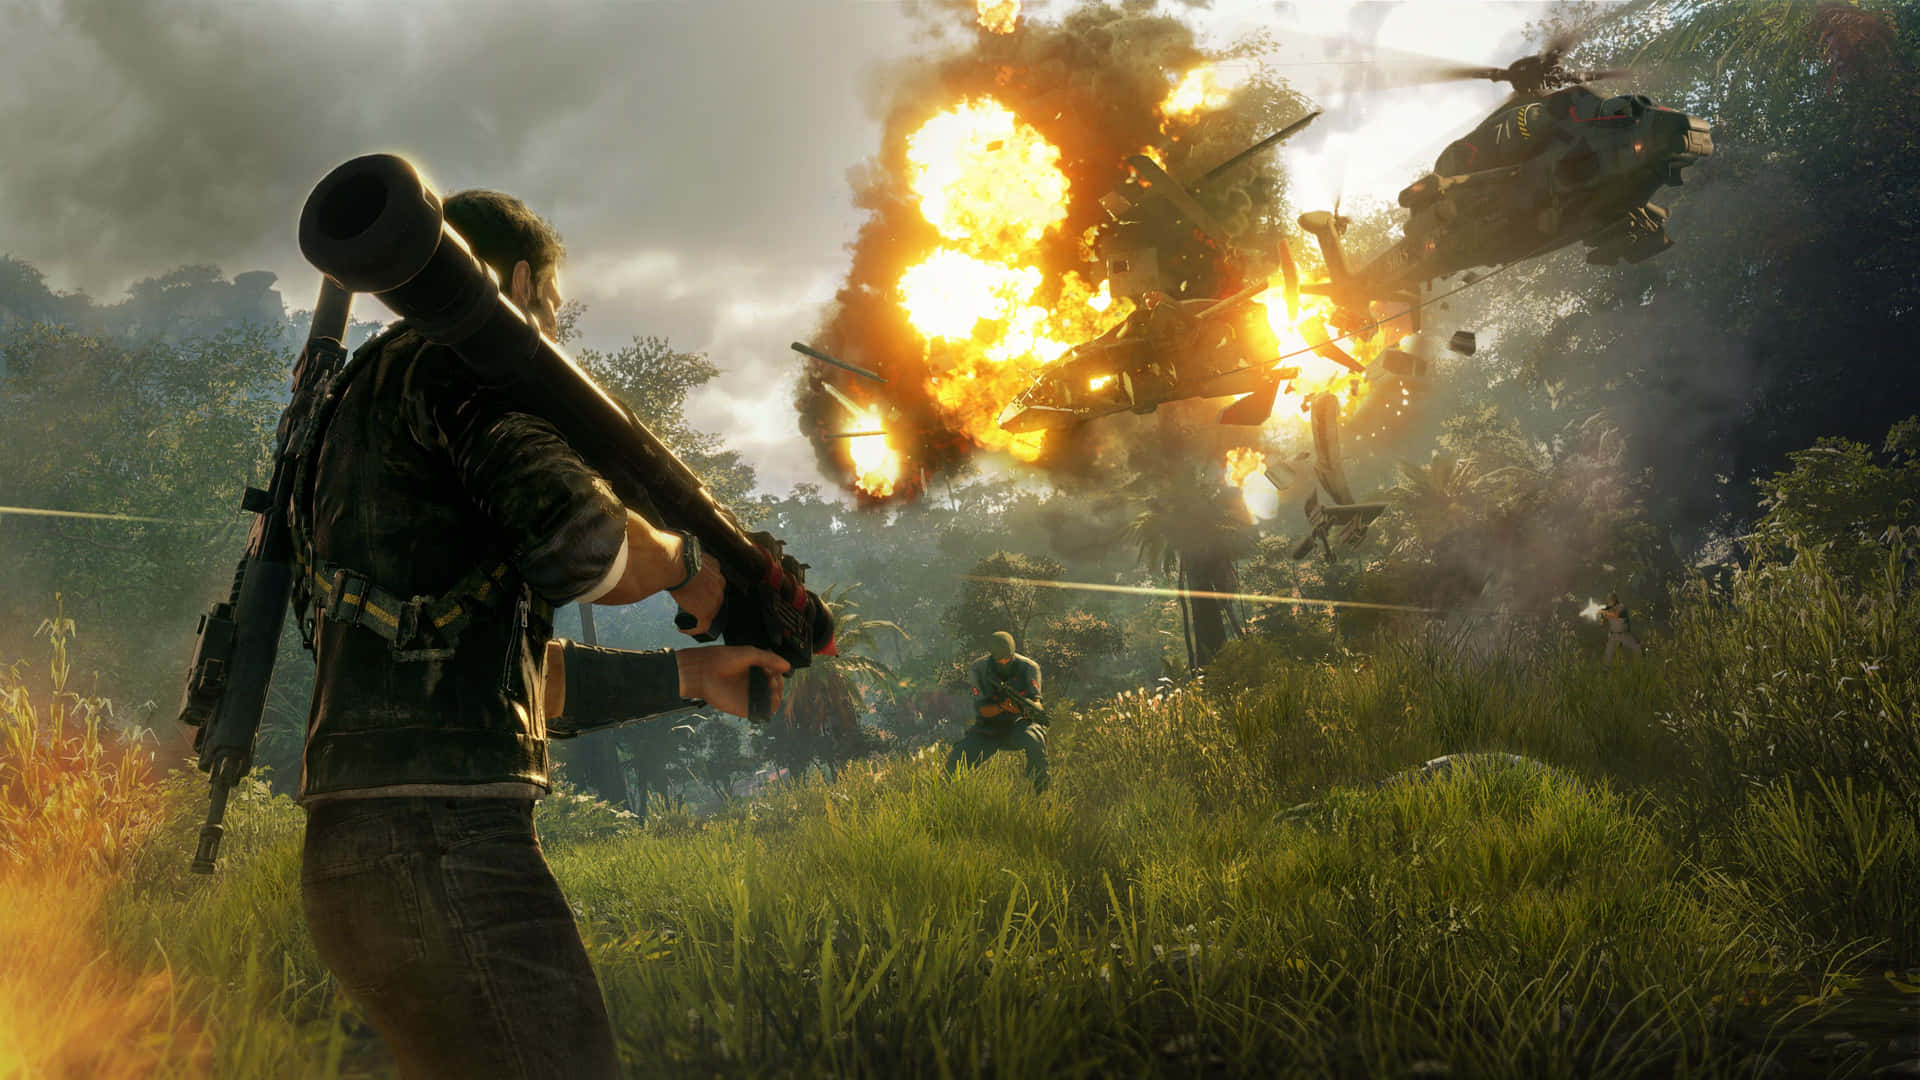 Embark on an Adventure With Just Cause 4